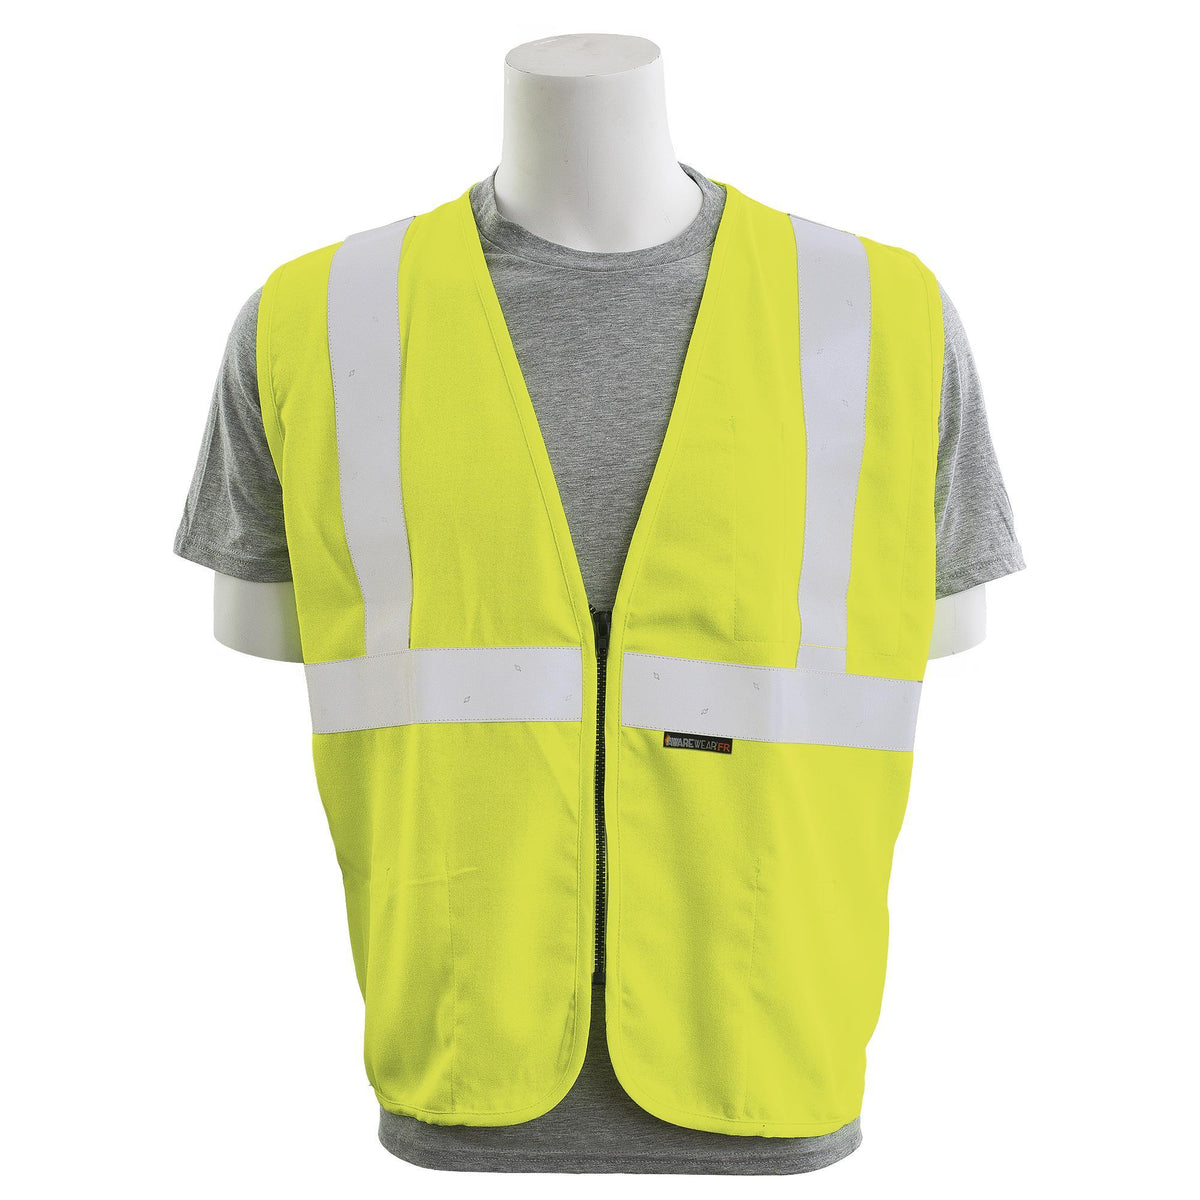 IFR150Z Class 2 Inherently Flame Resistant Zippered Safety Vest 1PC